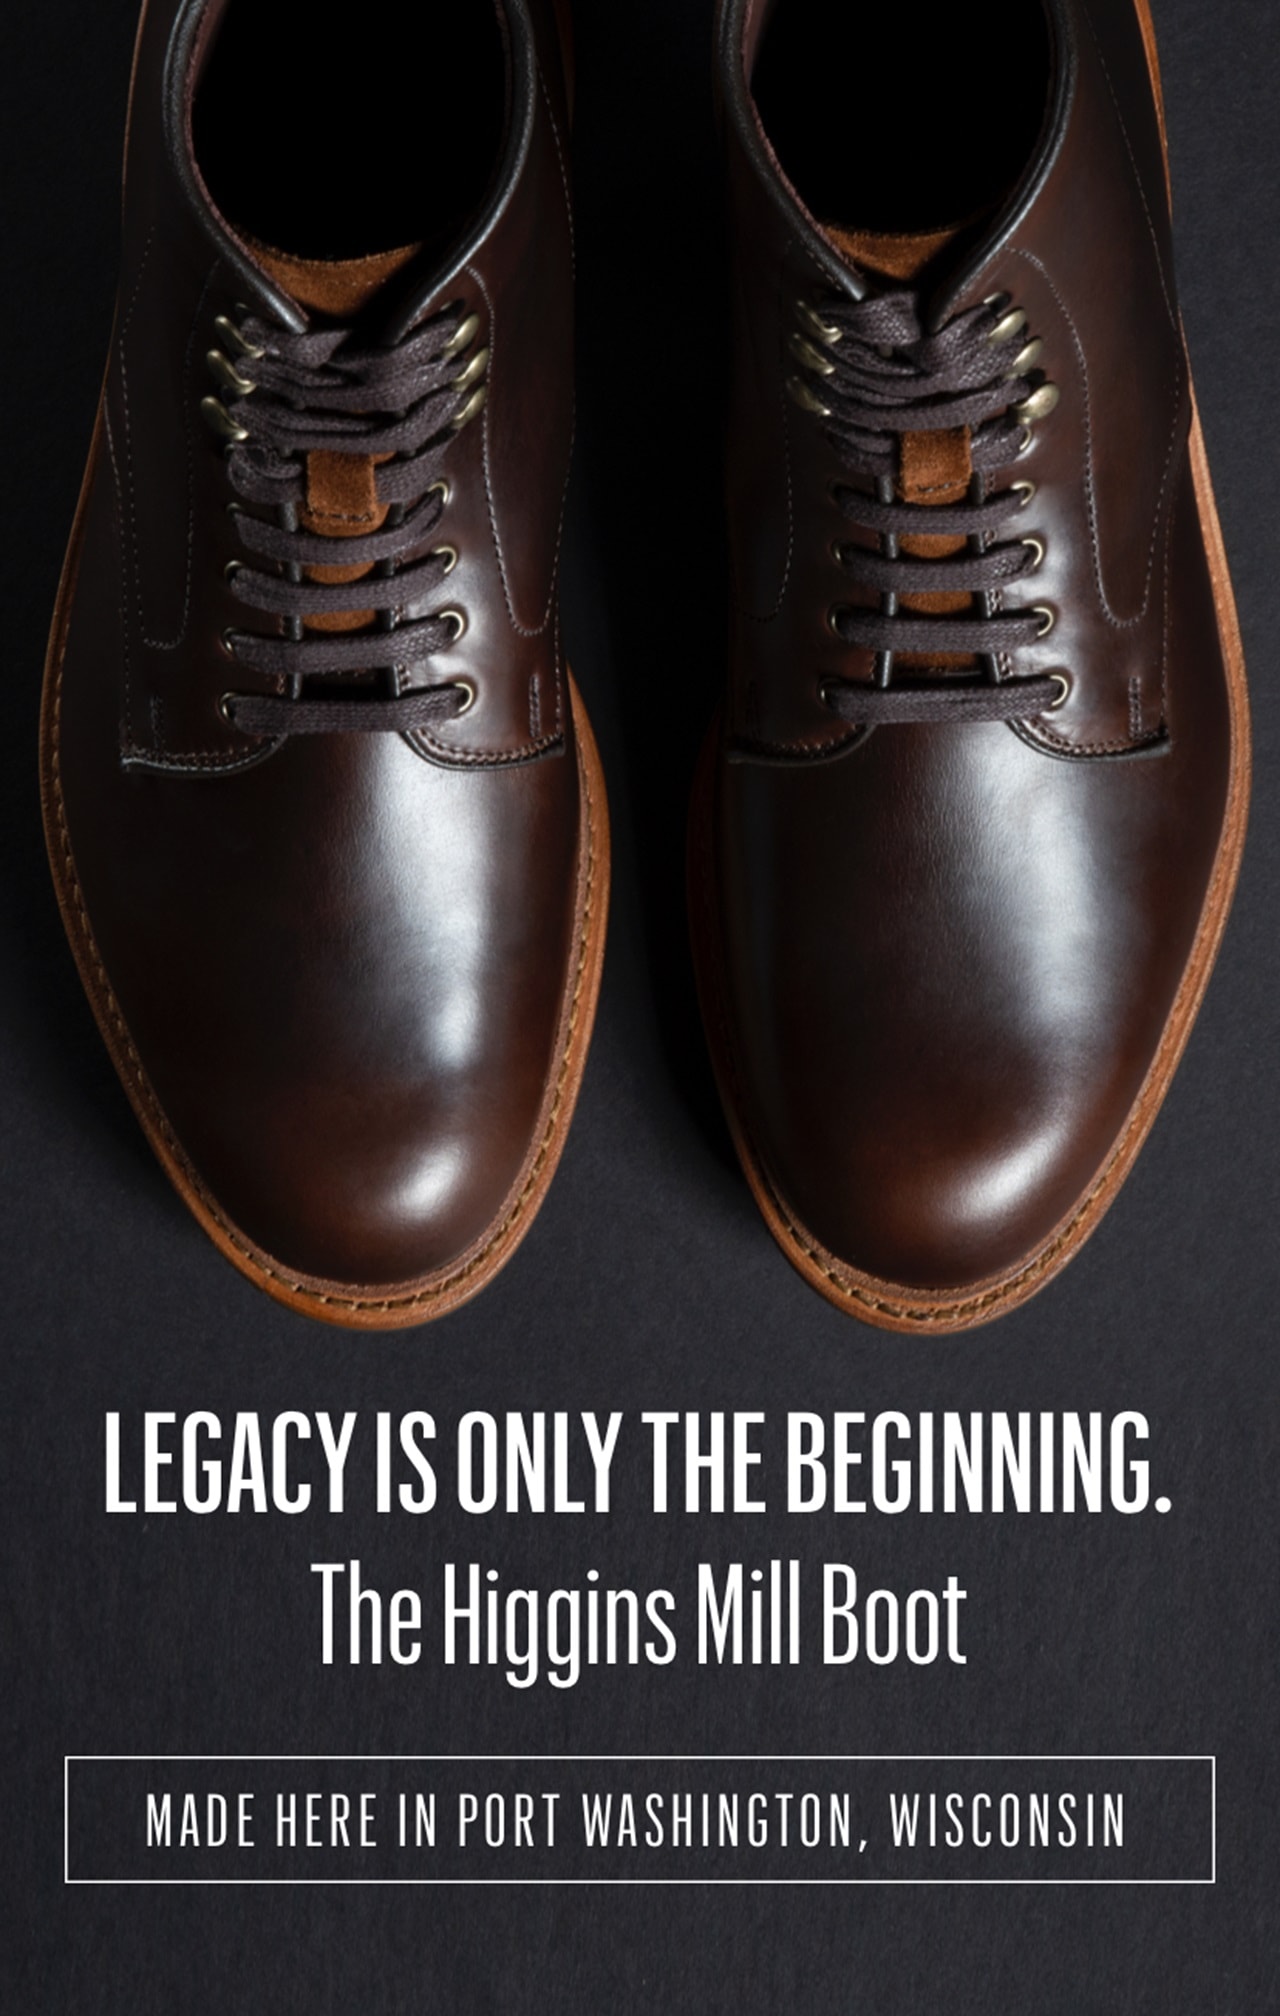 Legacy is only the beginning: The Higgins Mill Boot.  Made in Port Washington Wisconsin.